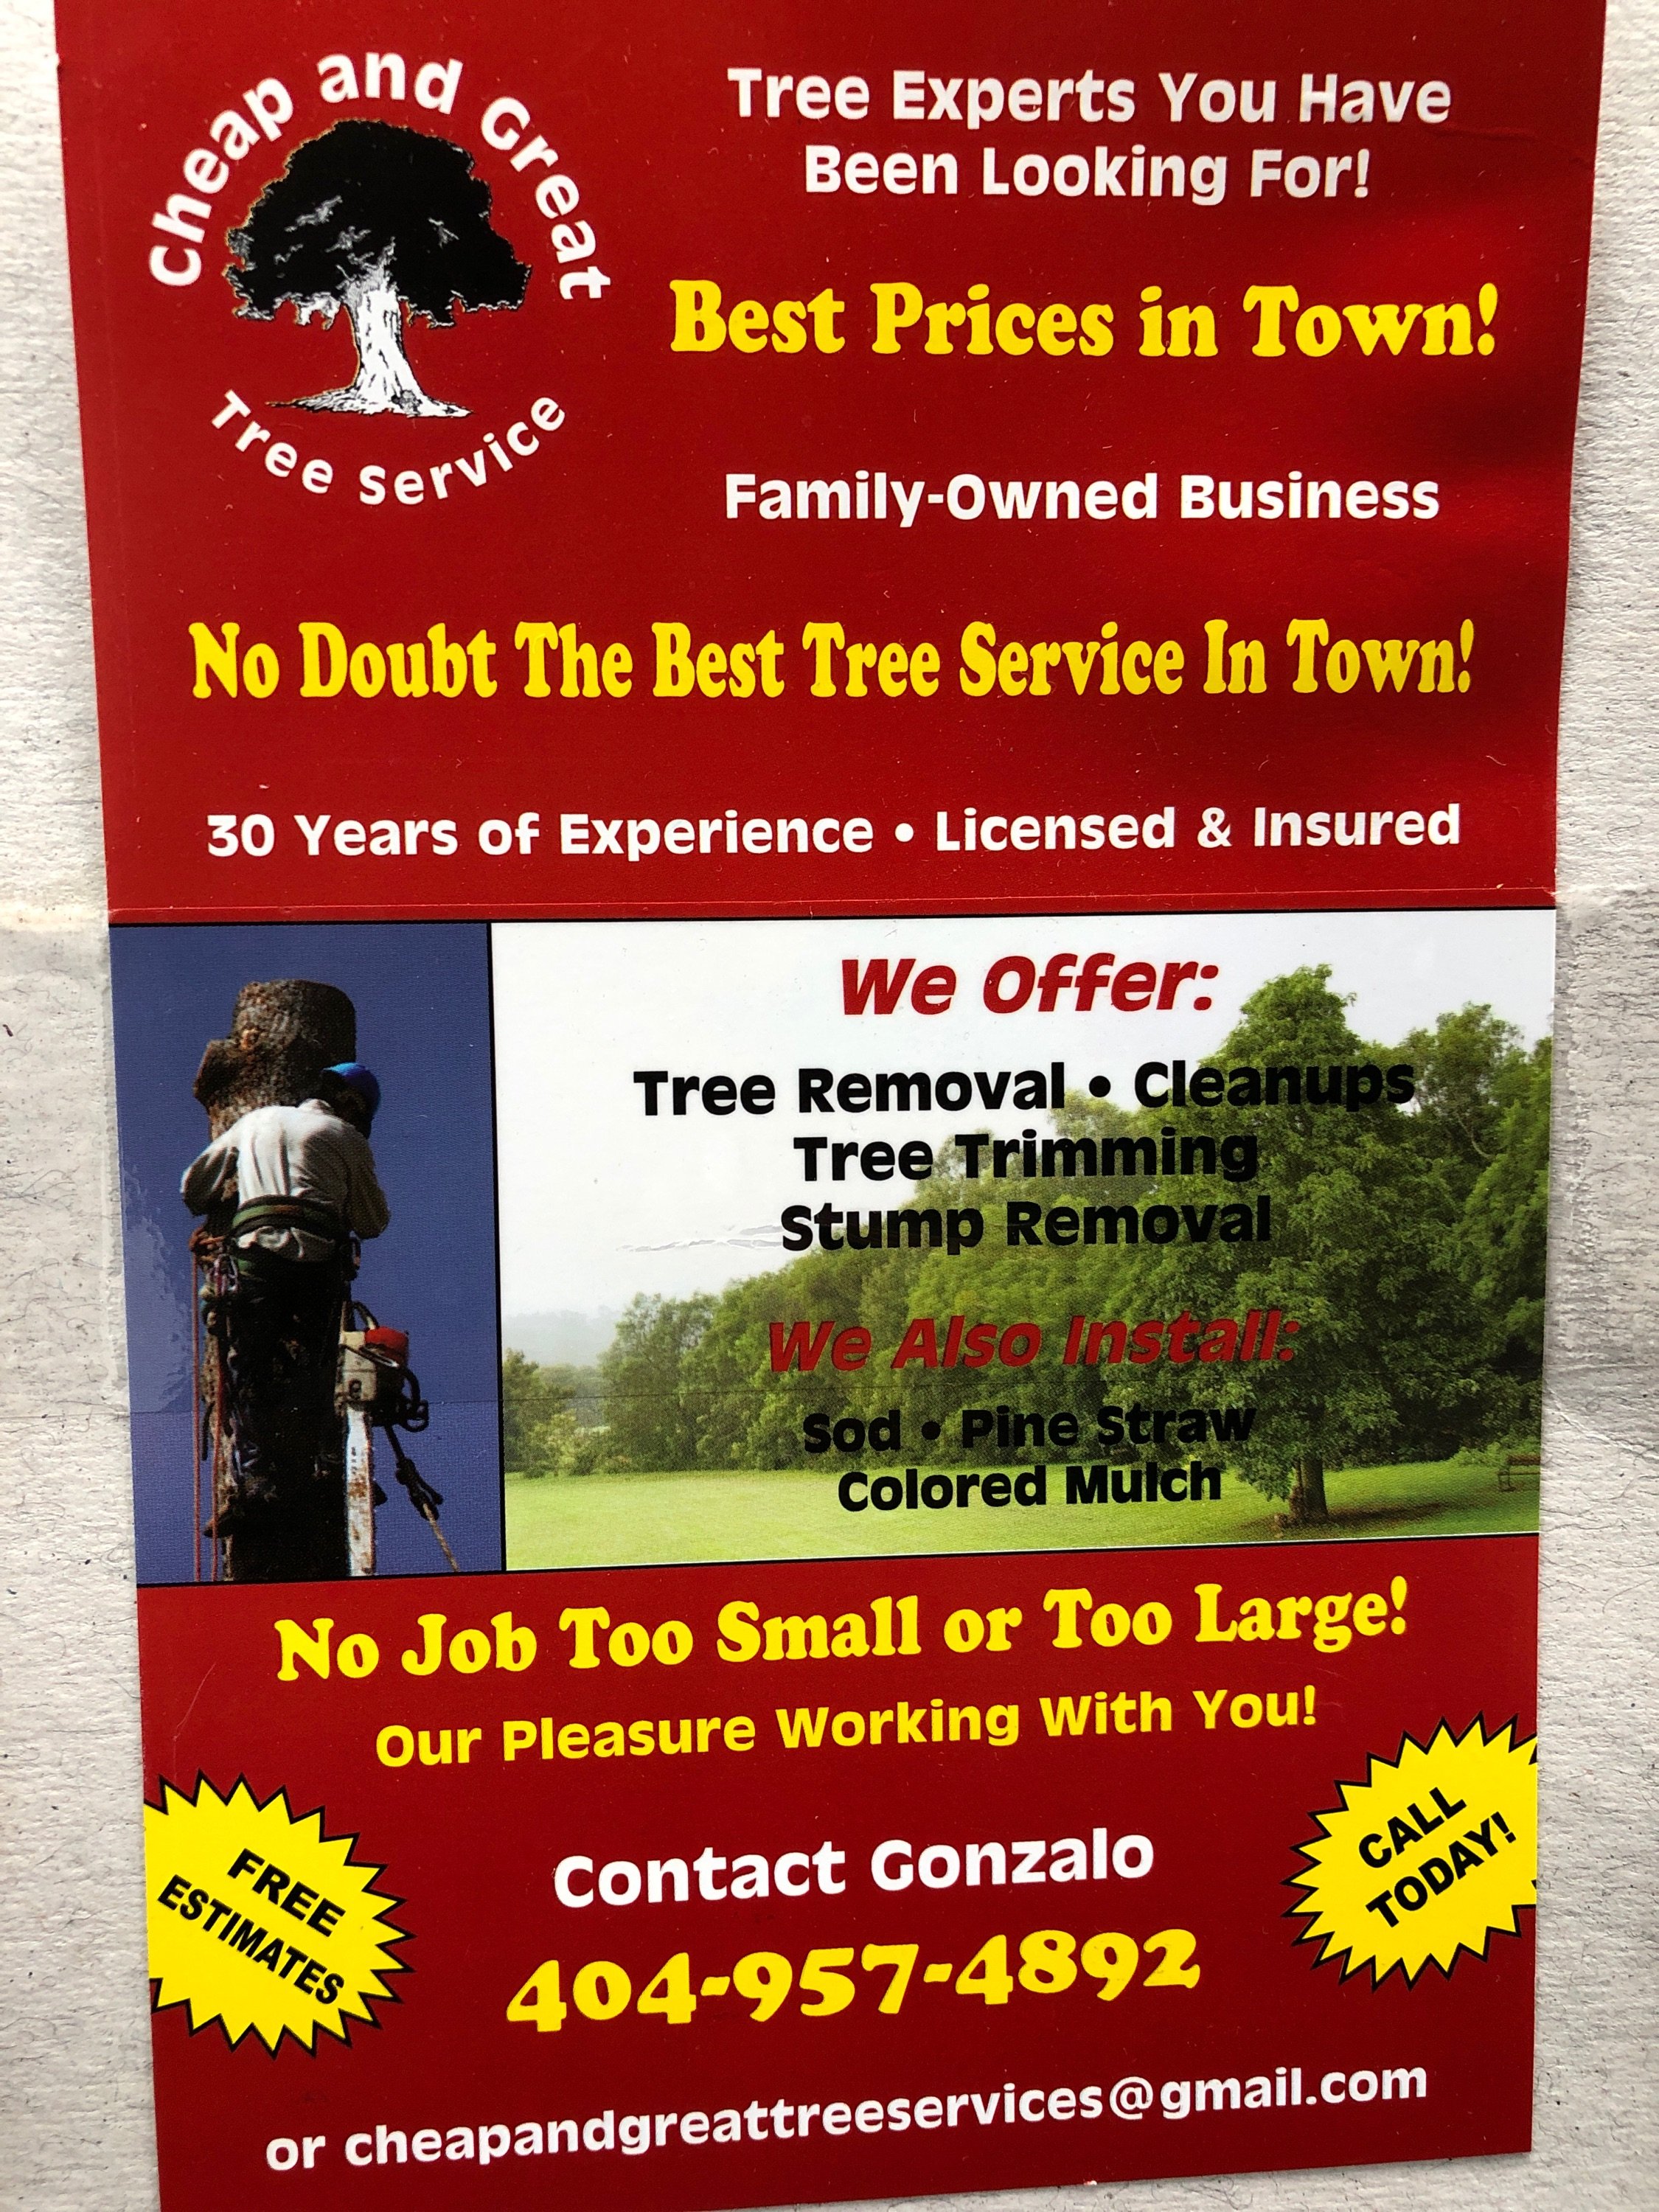 Cheap and Great Tree Services Logo